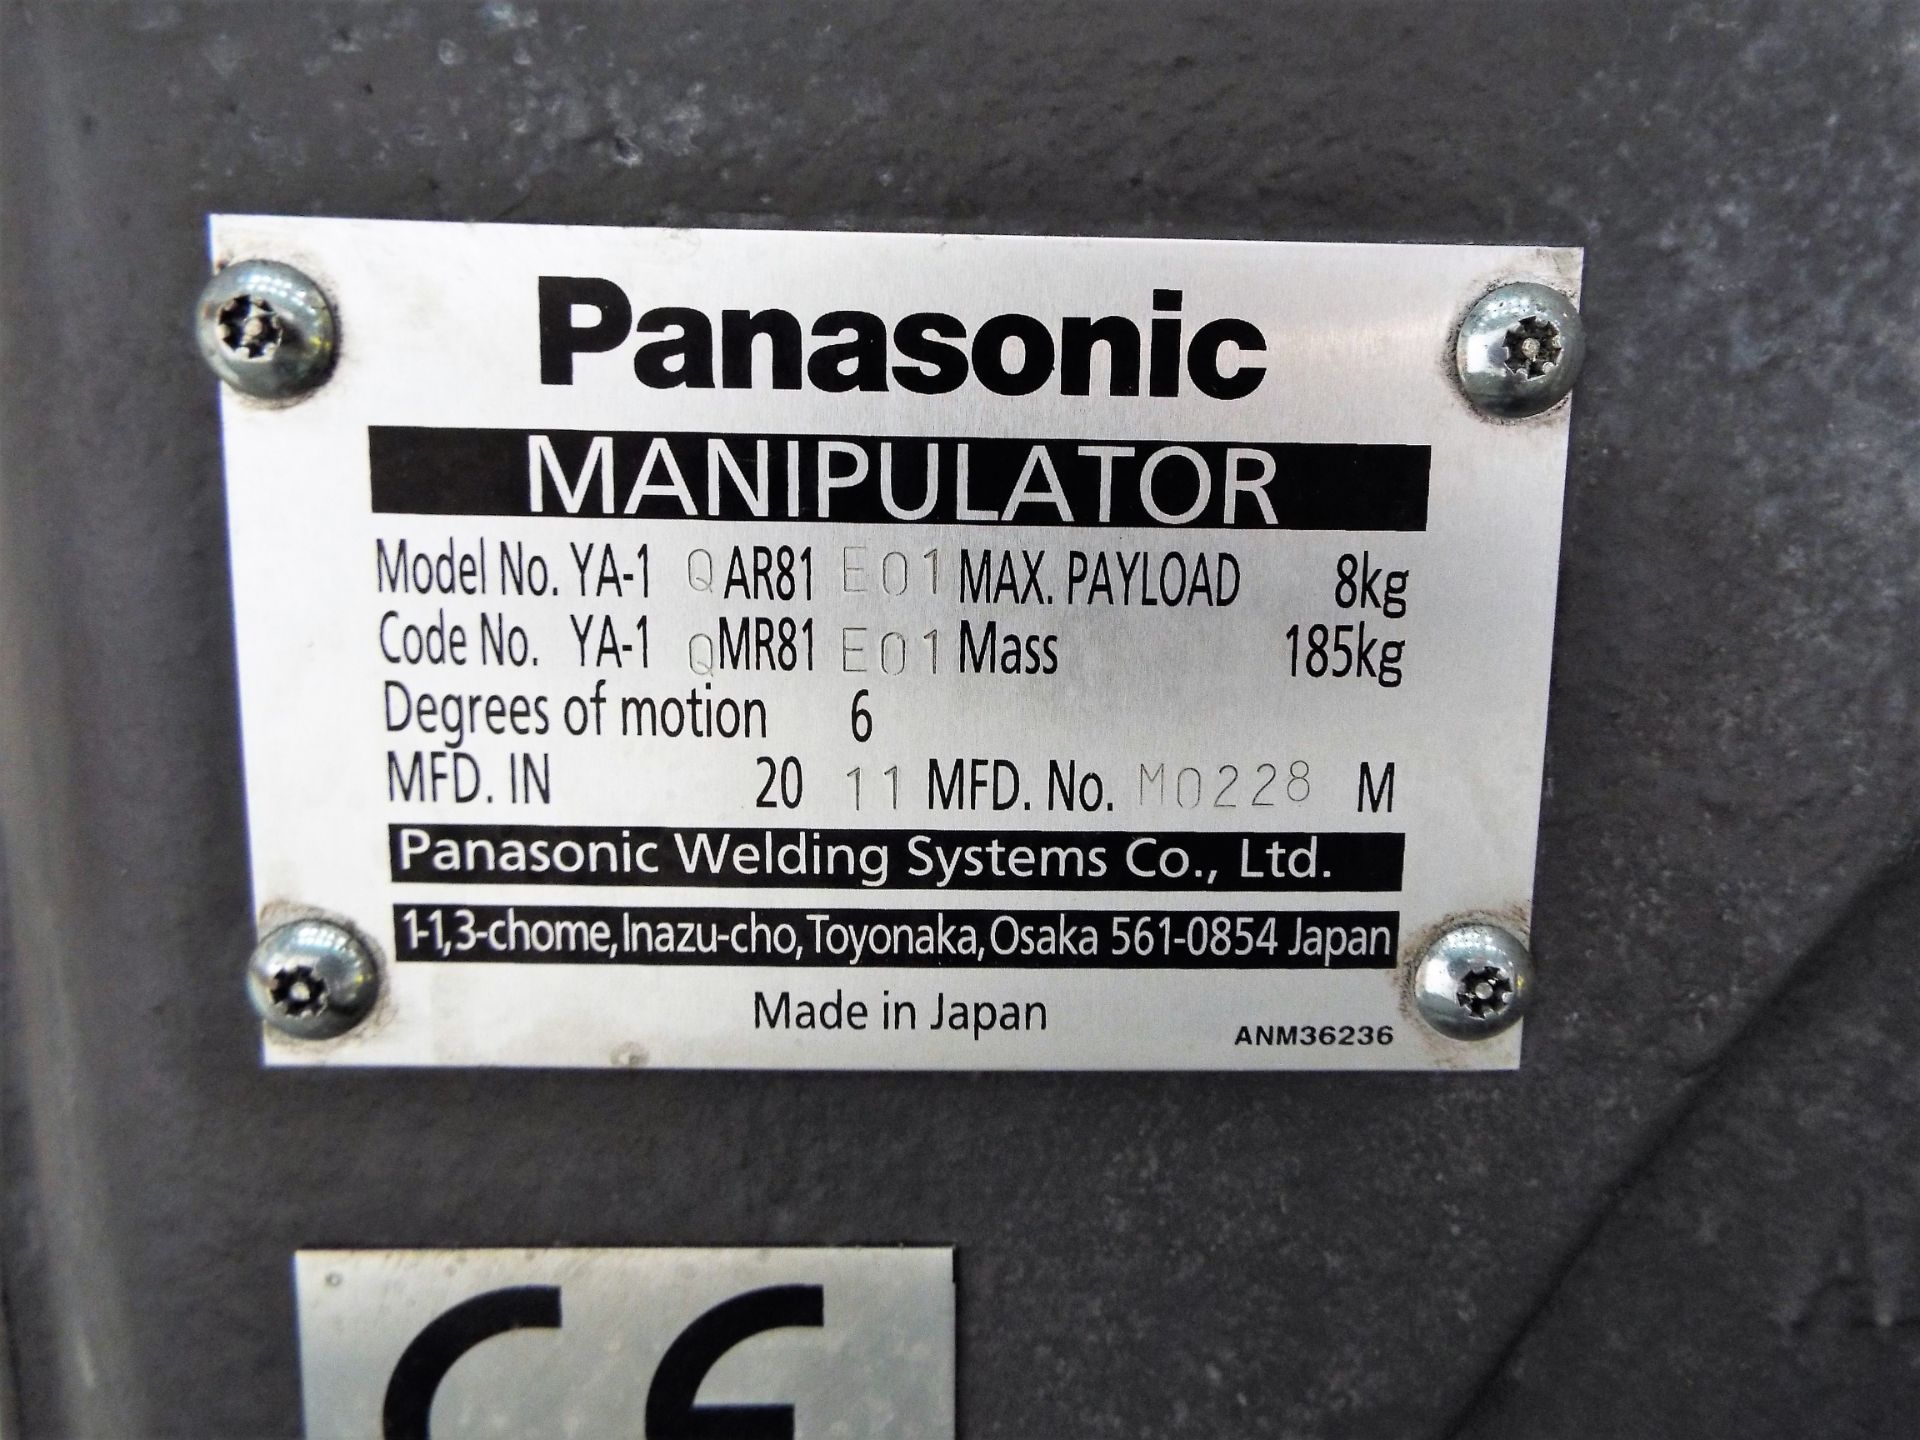 Panasonic TA1800 MIG Welding Robot cw Power Source,Transformer & 7th Axis Rotating Positioner - Image 6 of 10